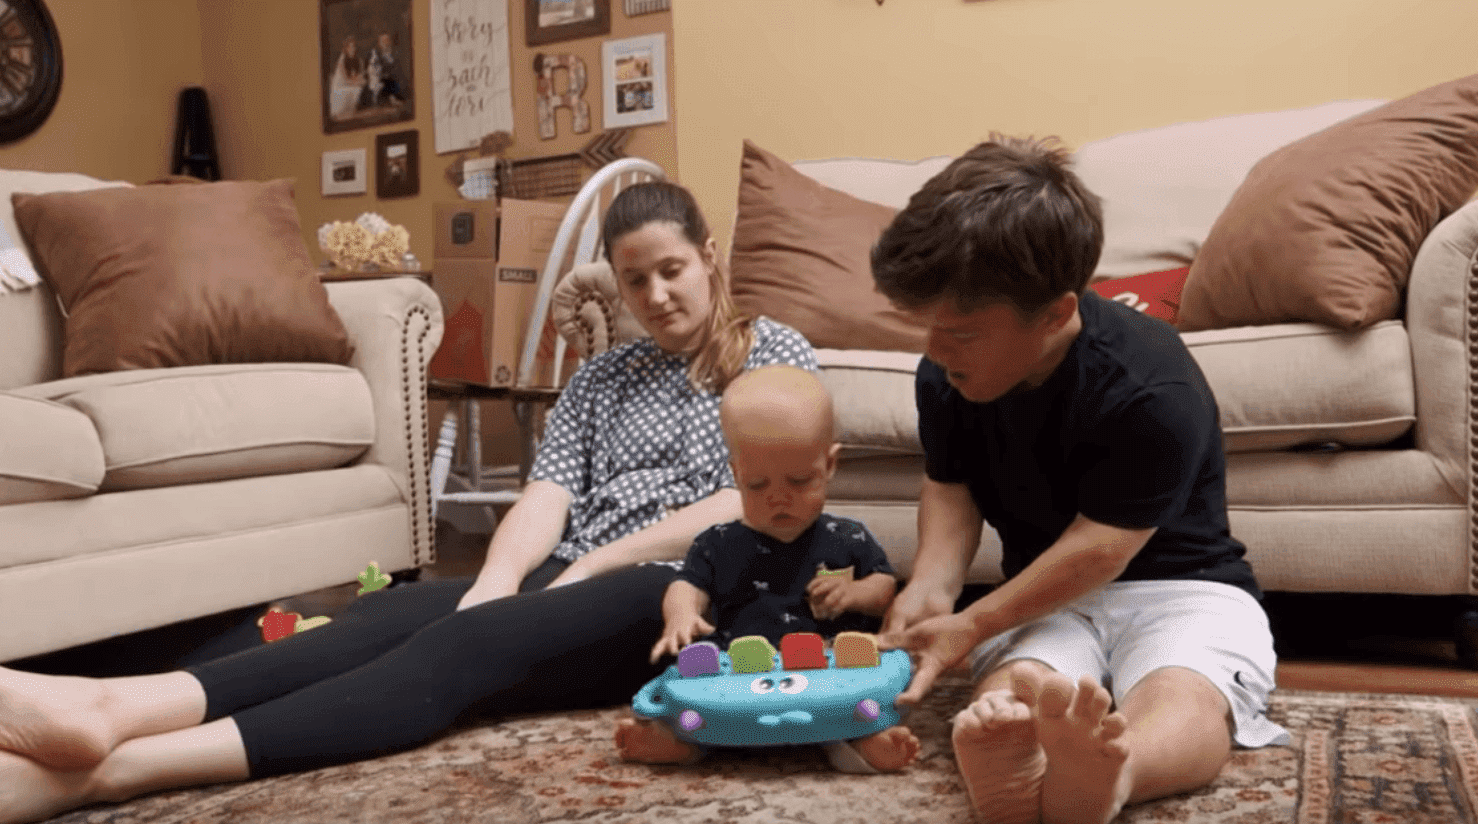 Tori, Zach, and their son Jackson during an episode of "Little People, Big World" from June 7, 2019.  | Source: YouTube/TLC